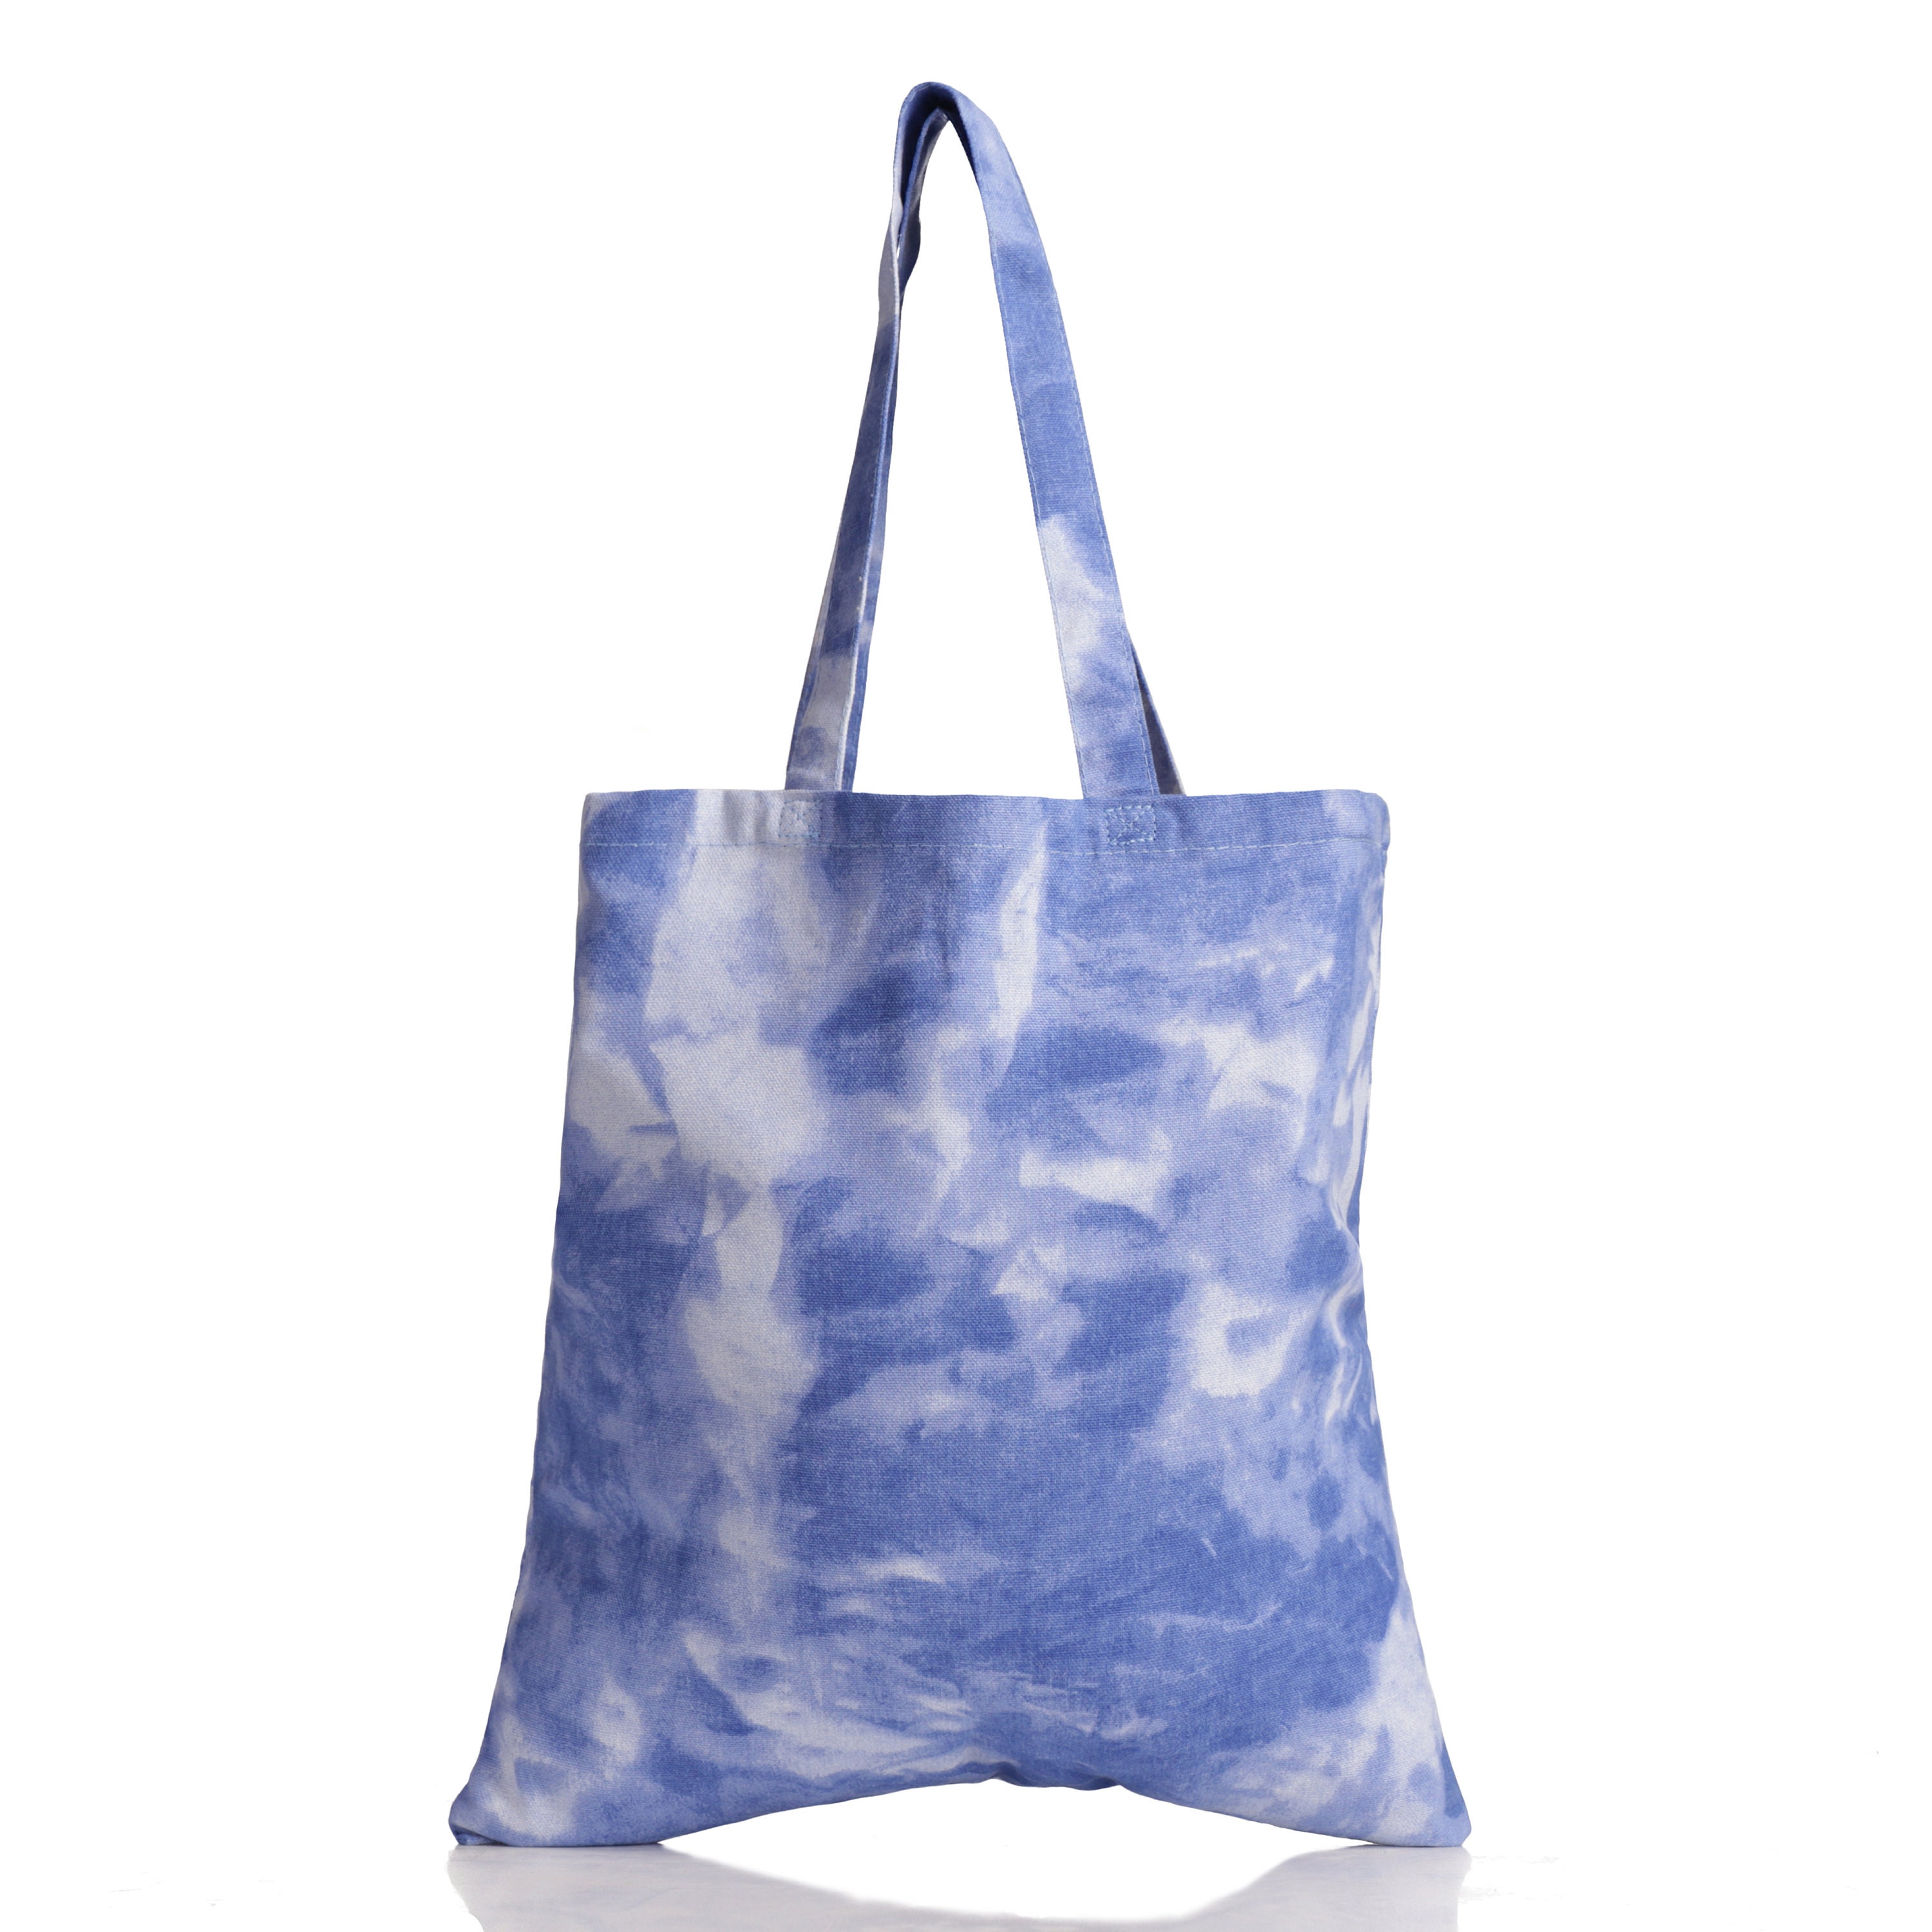 White Scarf and Plain Tote Bag | Things Items to Tie Dye | Party Supply DIY  | Women Cotton Neckerchief & Long Handle Bags | Perfect for Kids Ladies